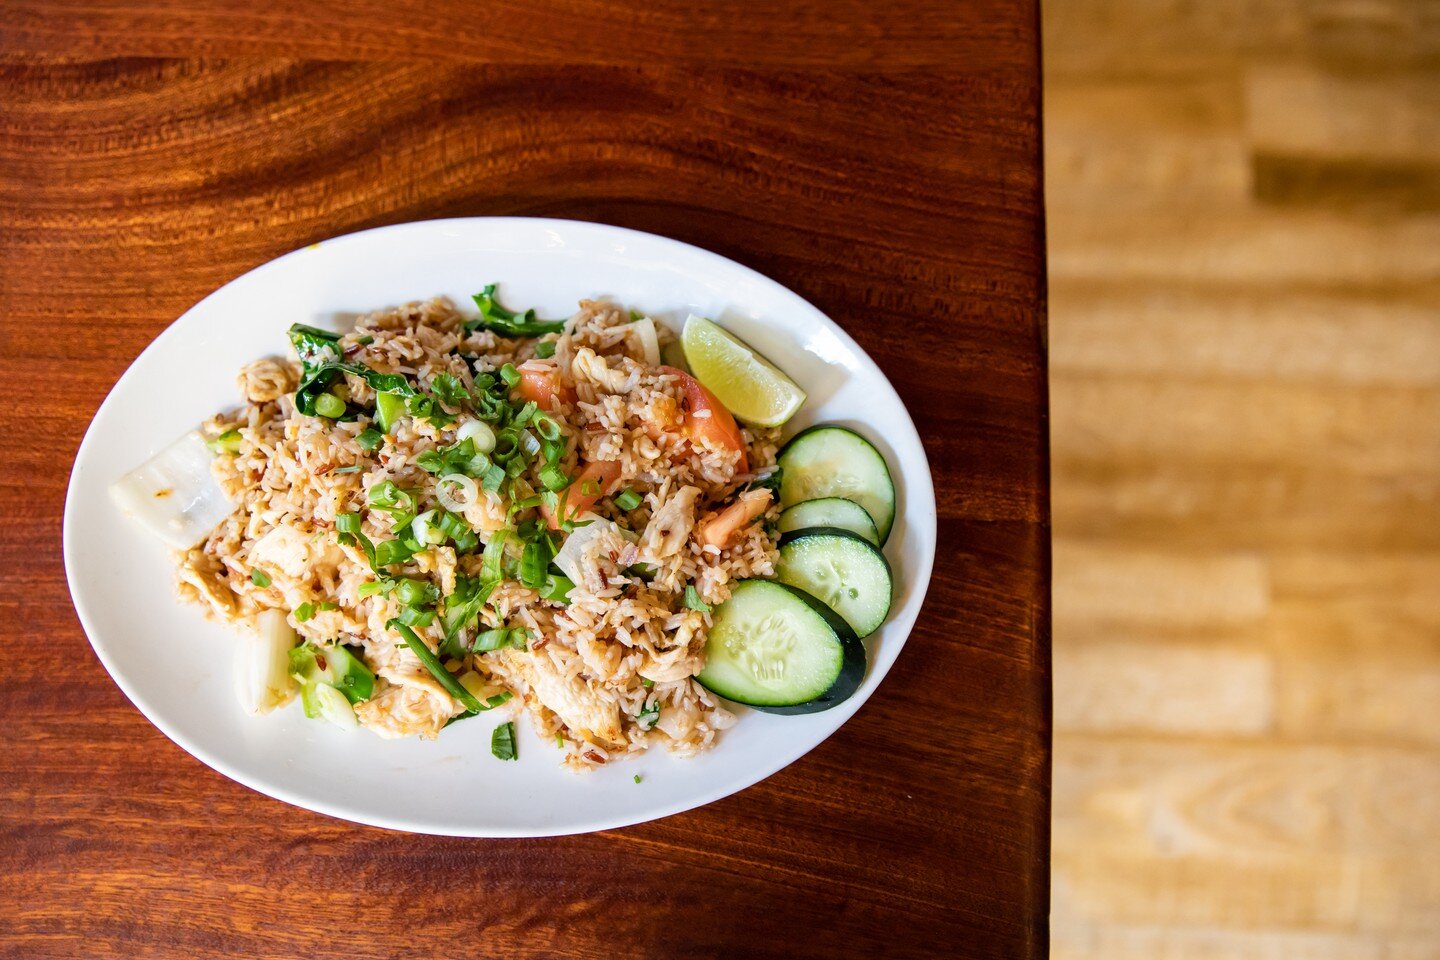 Nominated by its popularity, &lsquo;Classic Fried Rice&rsquo; with protein, egg, onions, tomatoes and Gai Lan is an all-time Thai heavy hitter dish.

TO-GO / Delivery / Dinning
11A &ndash; Close

Web: www.thaipeacockpdx.com

#thaipeacock #thaipeacock